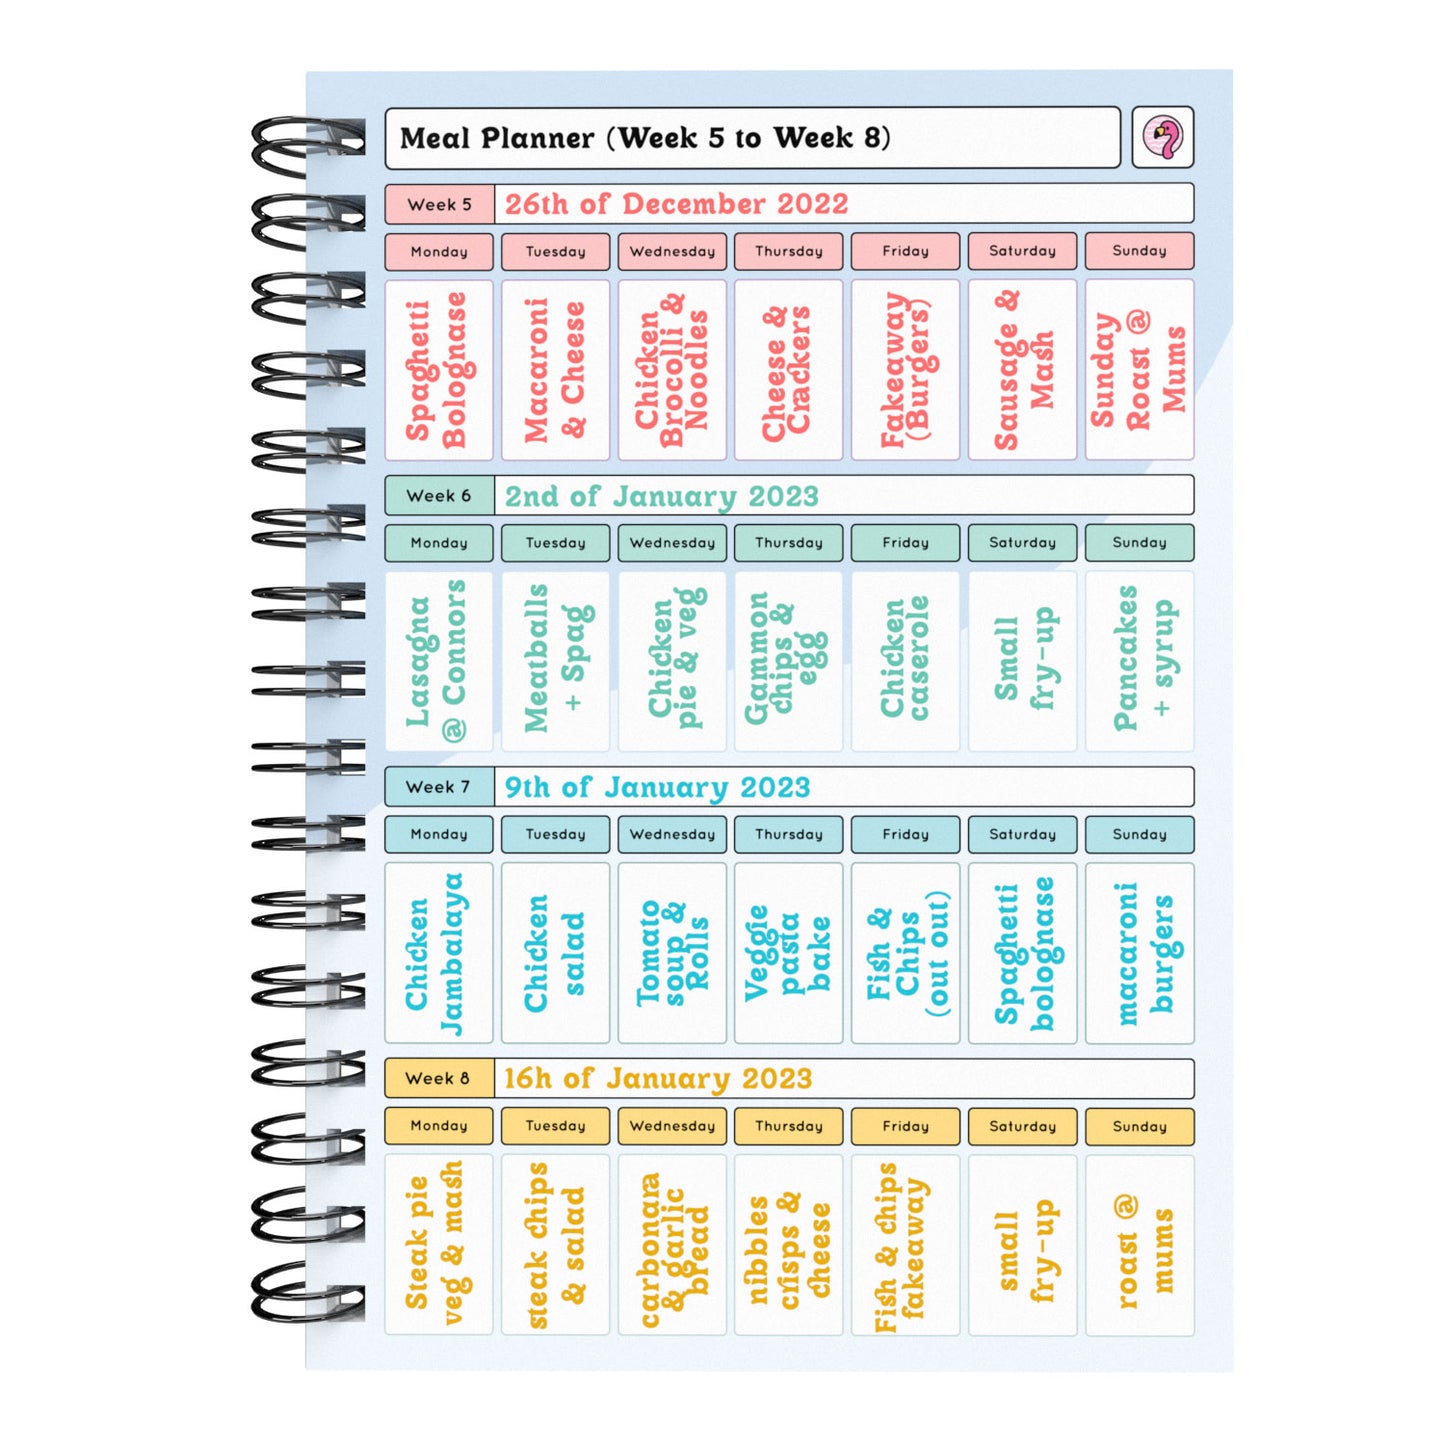 Food Diary - C21 - Calorie Counting